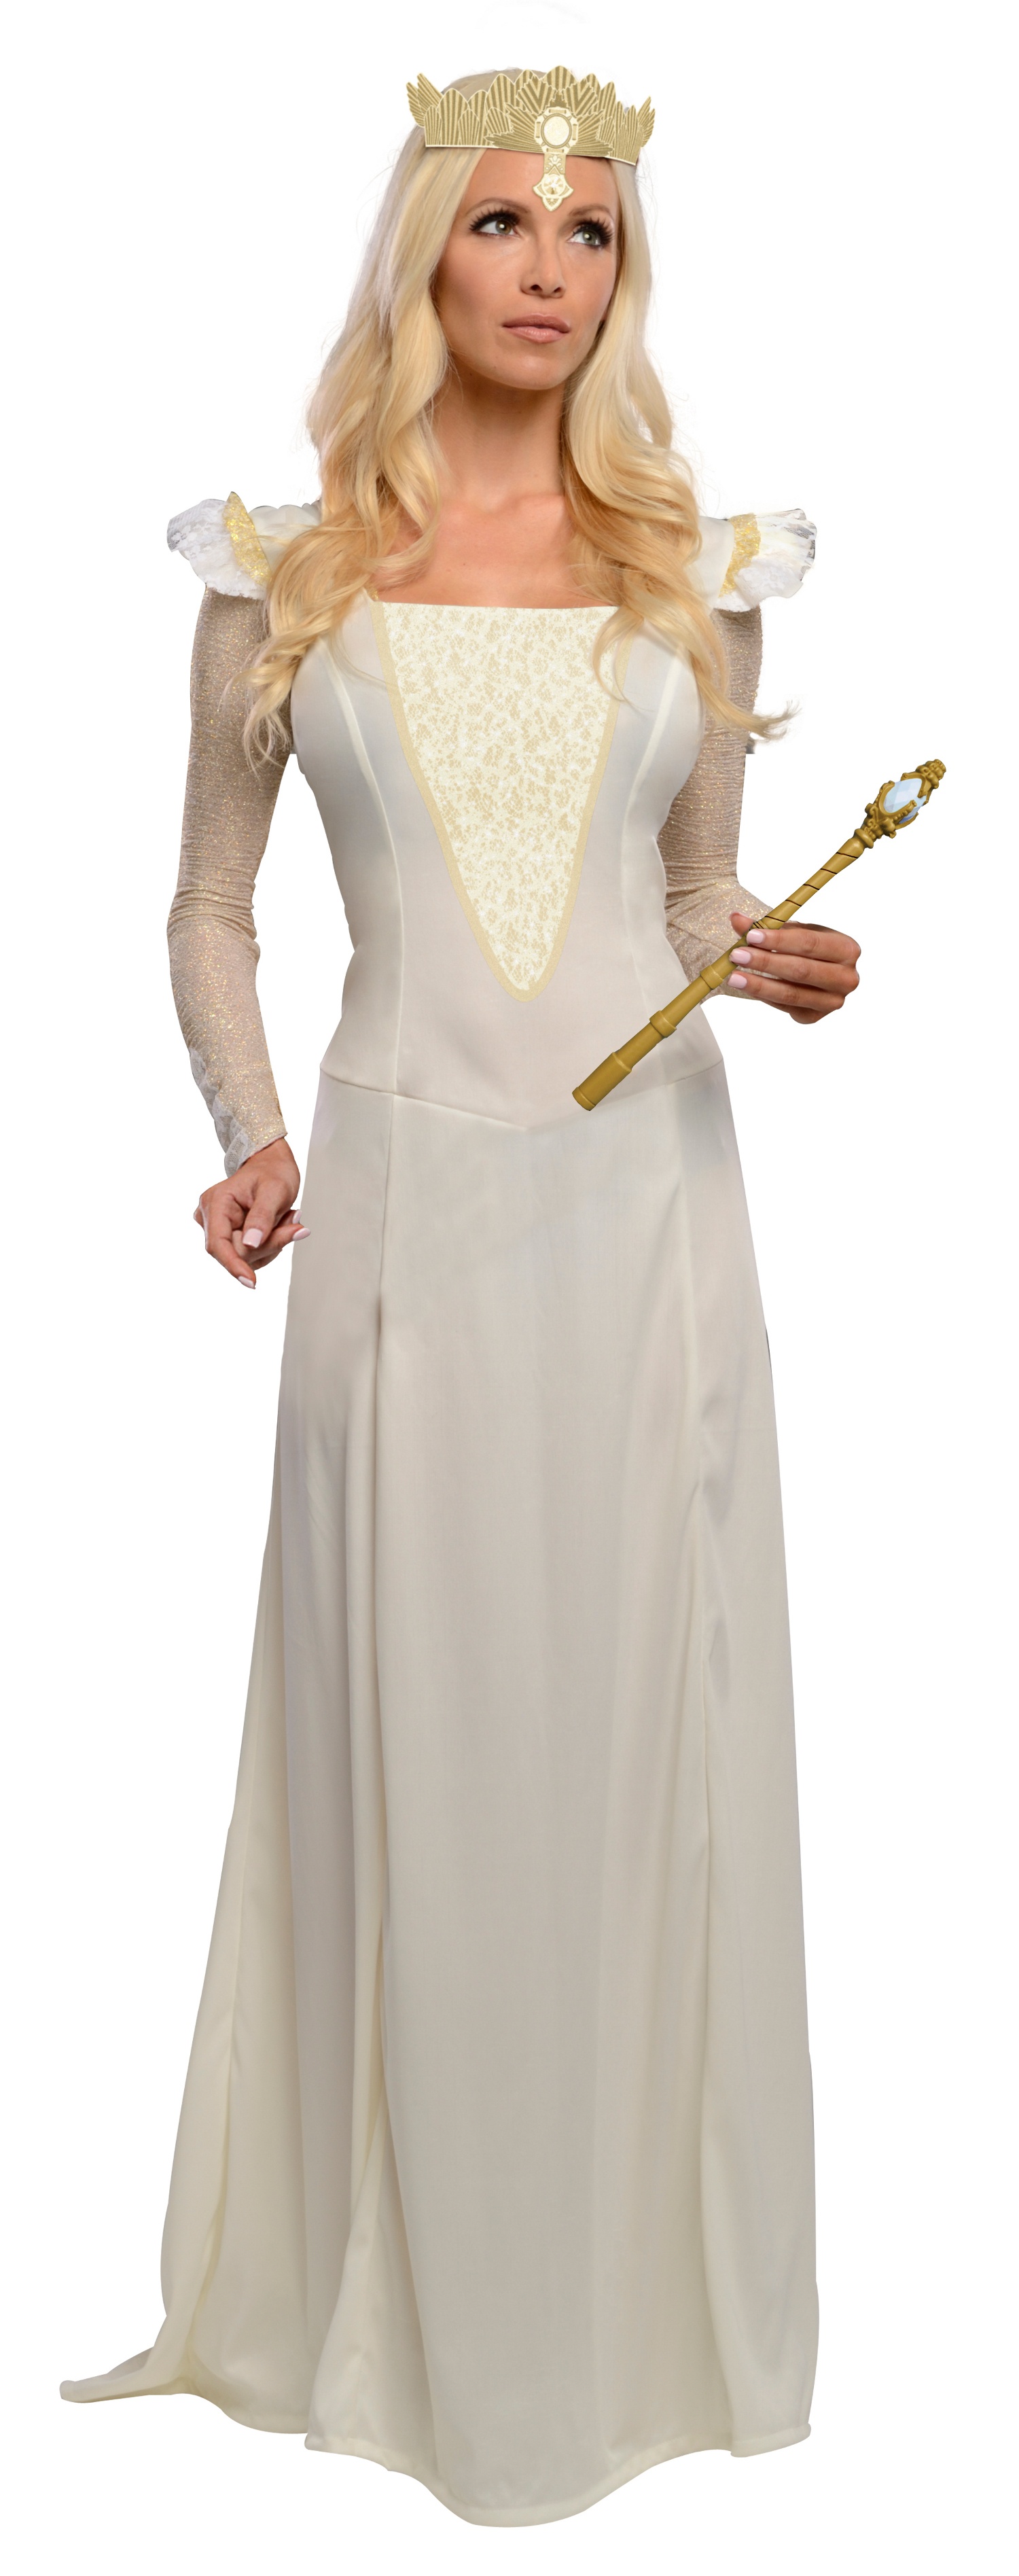 good-witch-2-glinda-costume-costumes-for-women-costume-collection